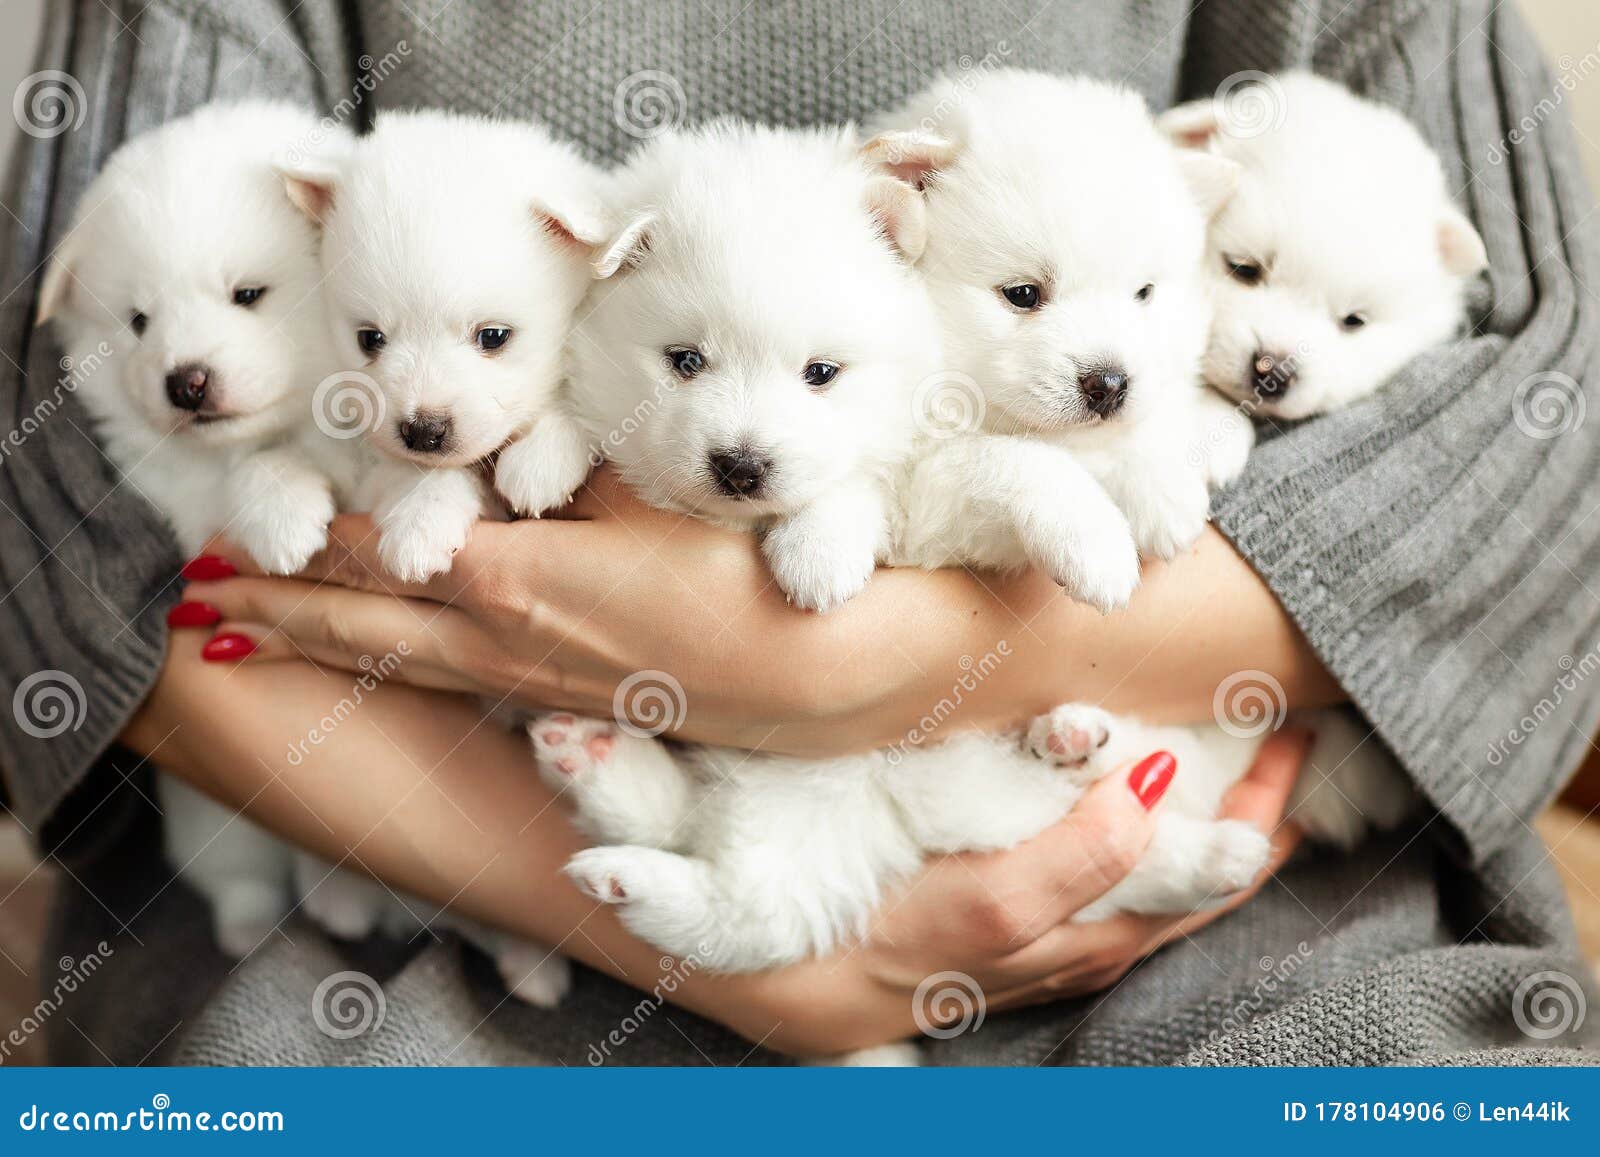 Cute Adorable Fluffy White Spitz Dog Puppies in Hands Stock Photo ...